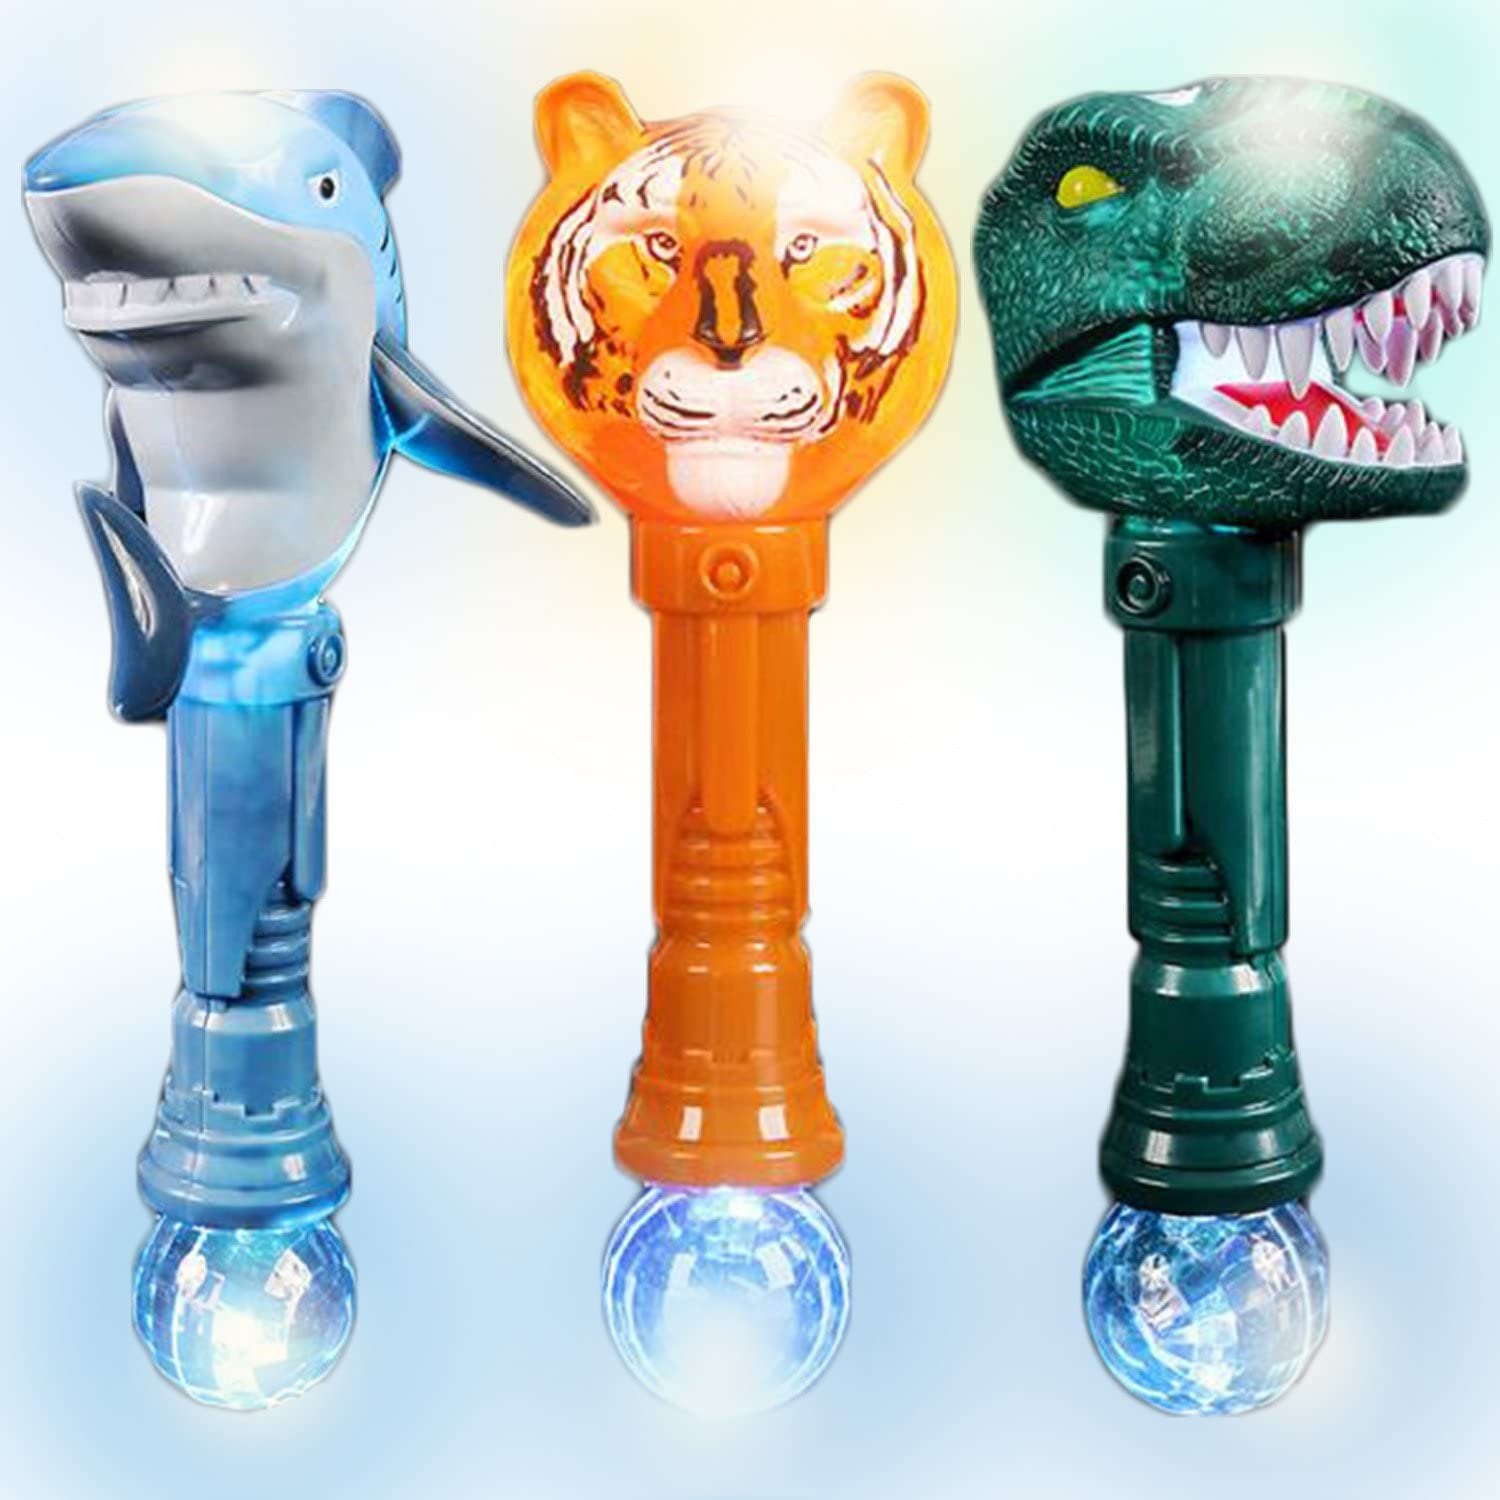 Ultra Fun Light Up Wand Set of 3 Includes T-Rex, Tiger, and Shark Wands - Beautiful Art Detailing Plastic - LED Party Favors, Gift for Kids - Batteries Included